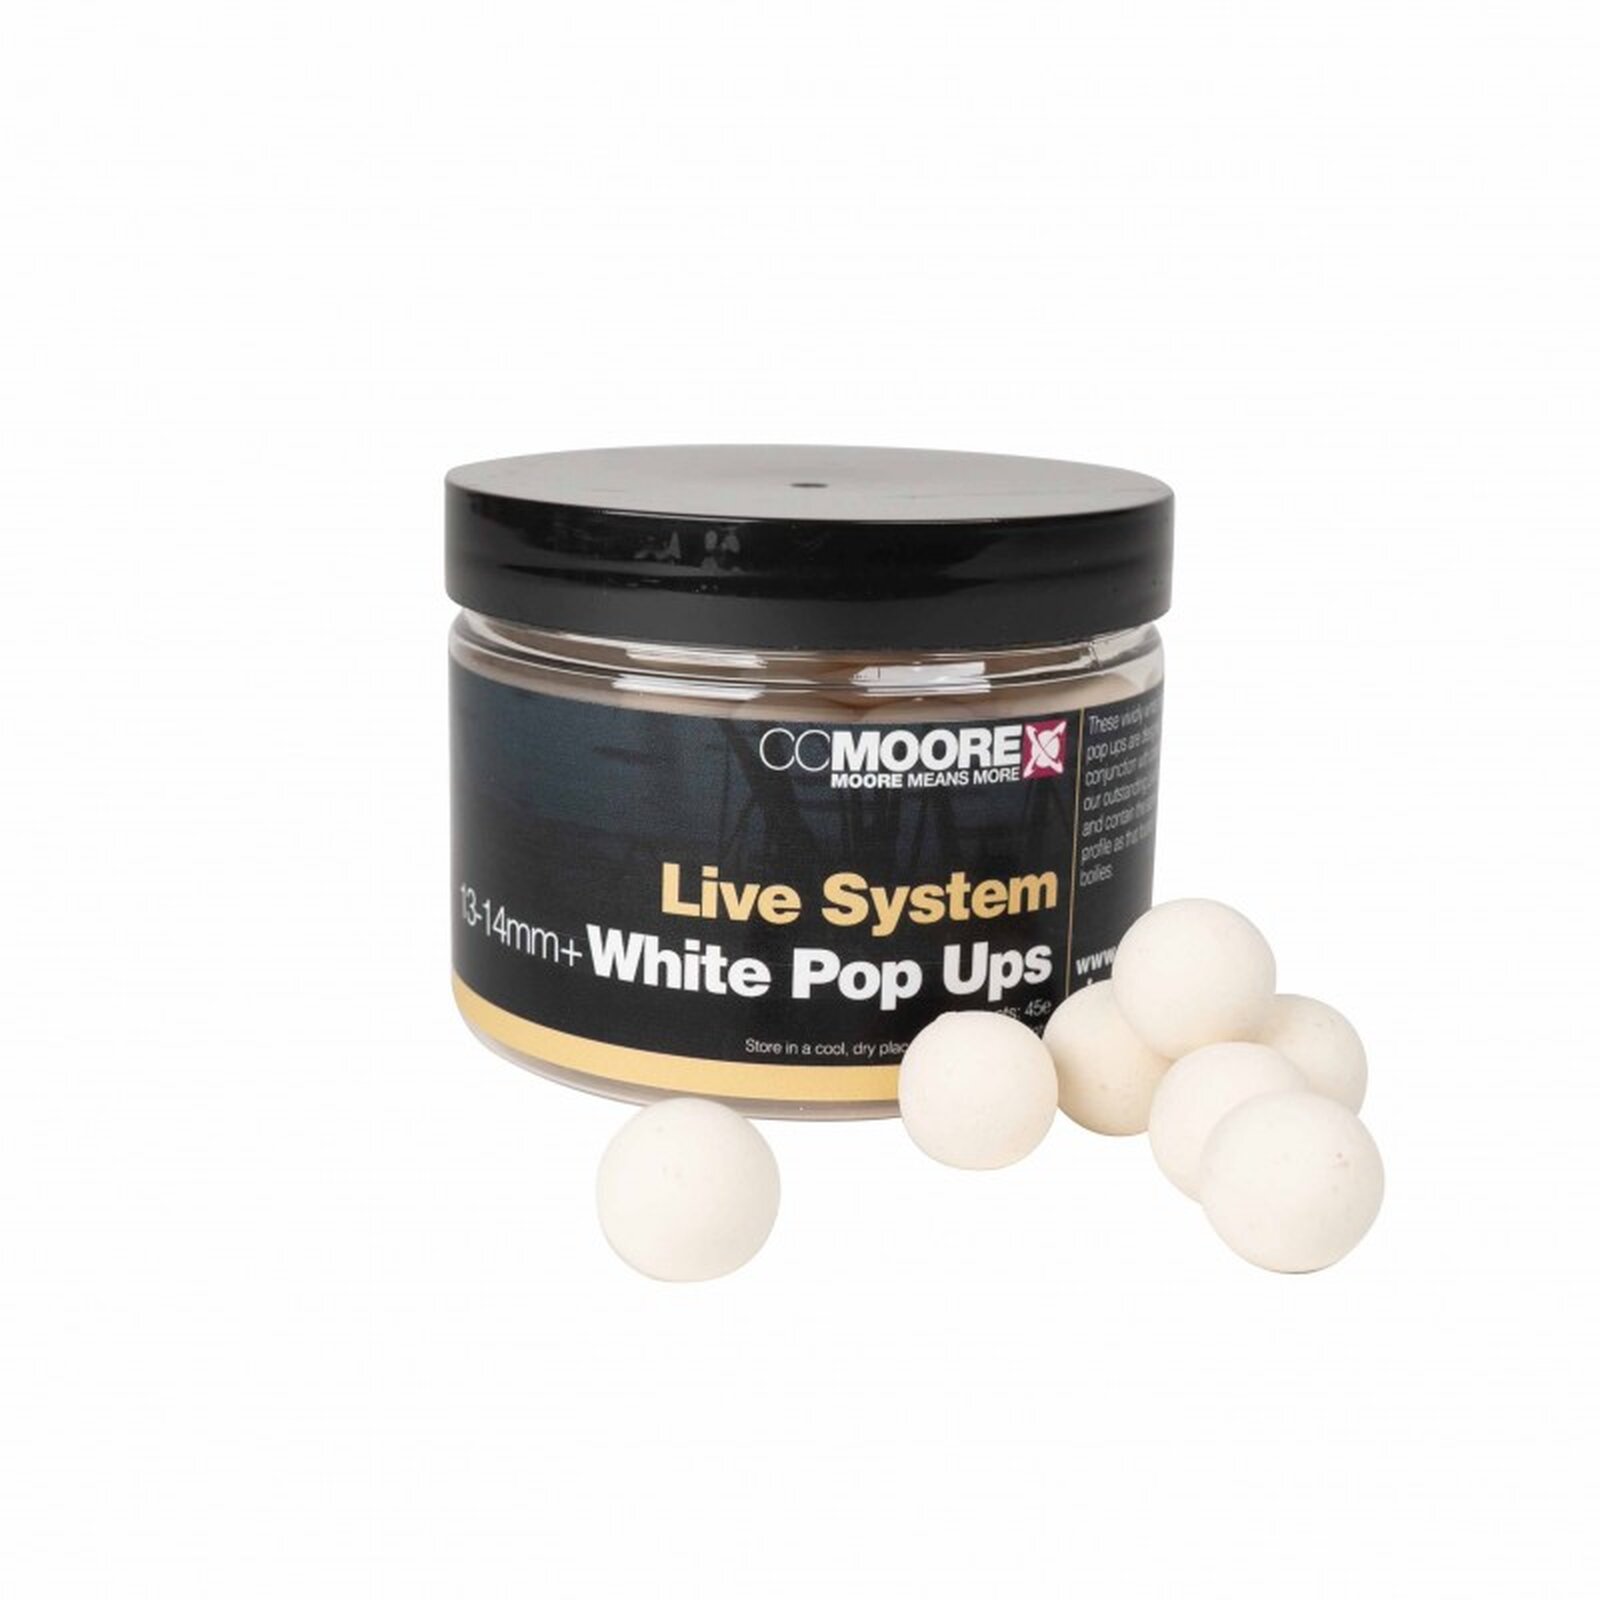 CC MOORE Live System White Pop Ups 13-14mm